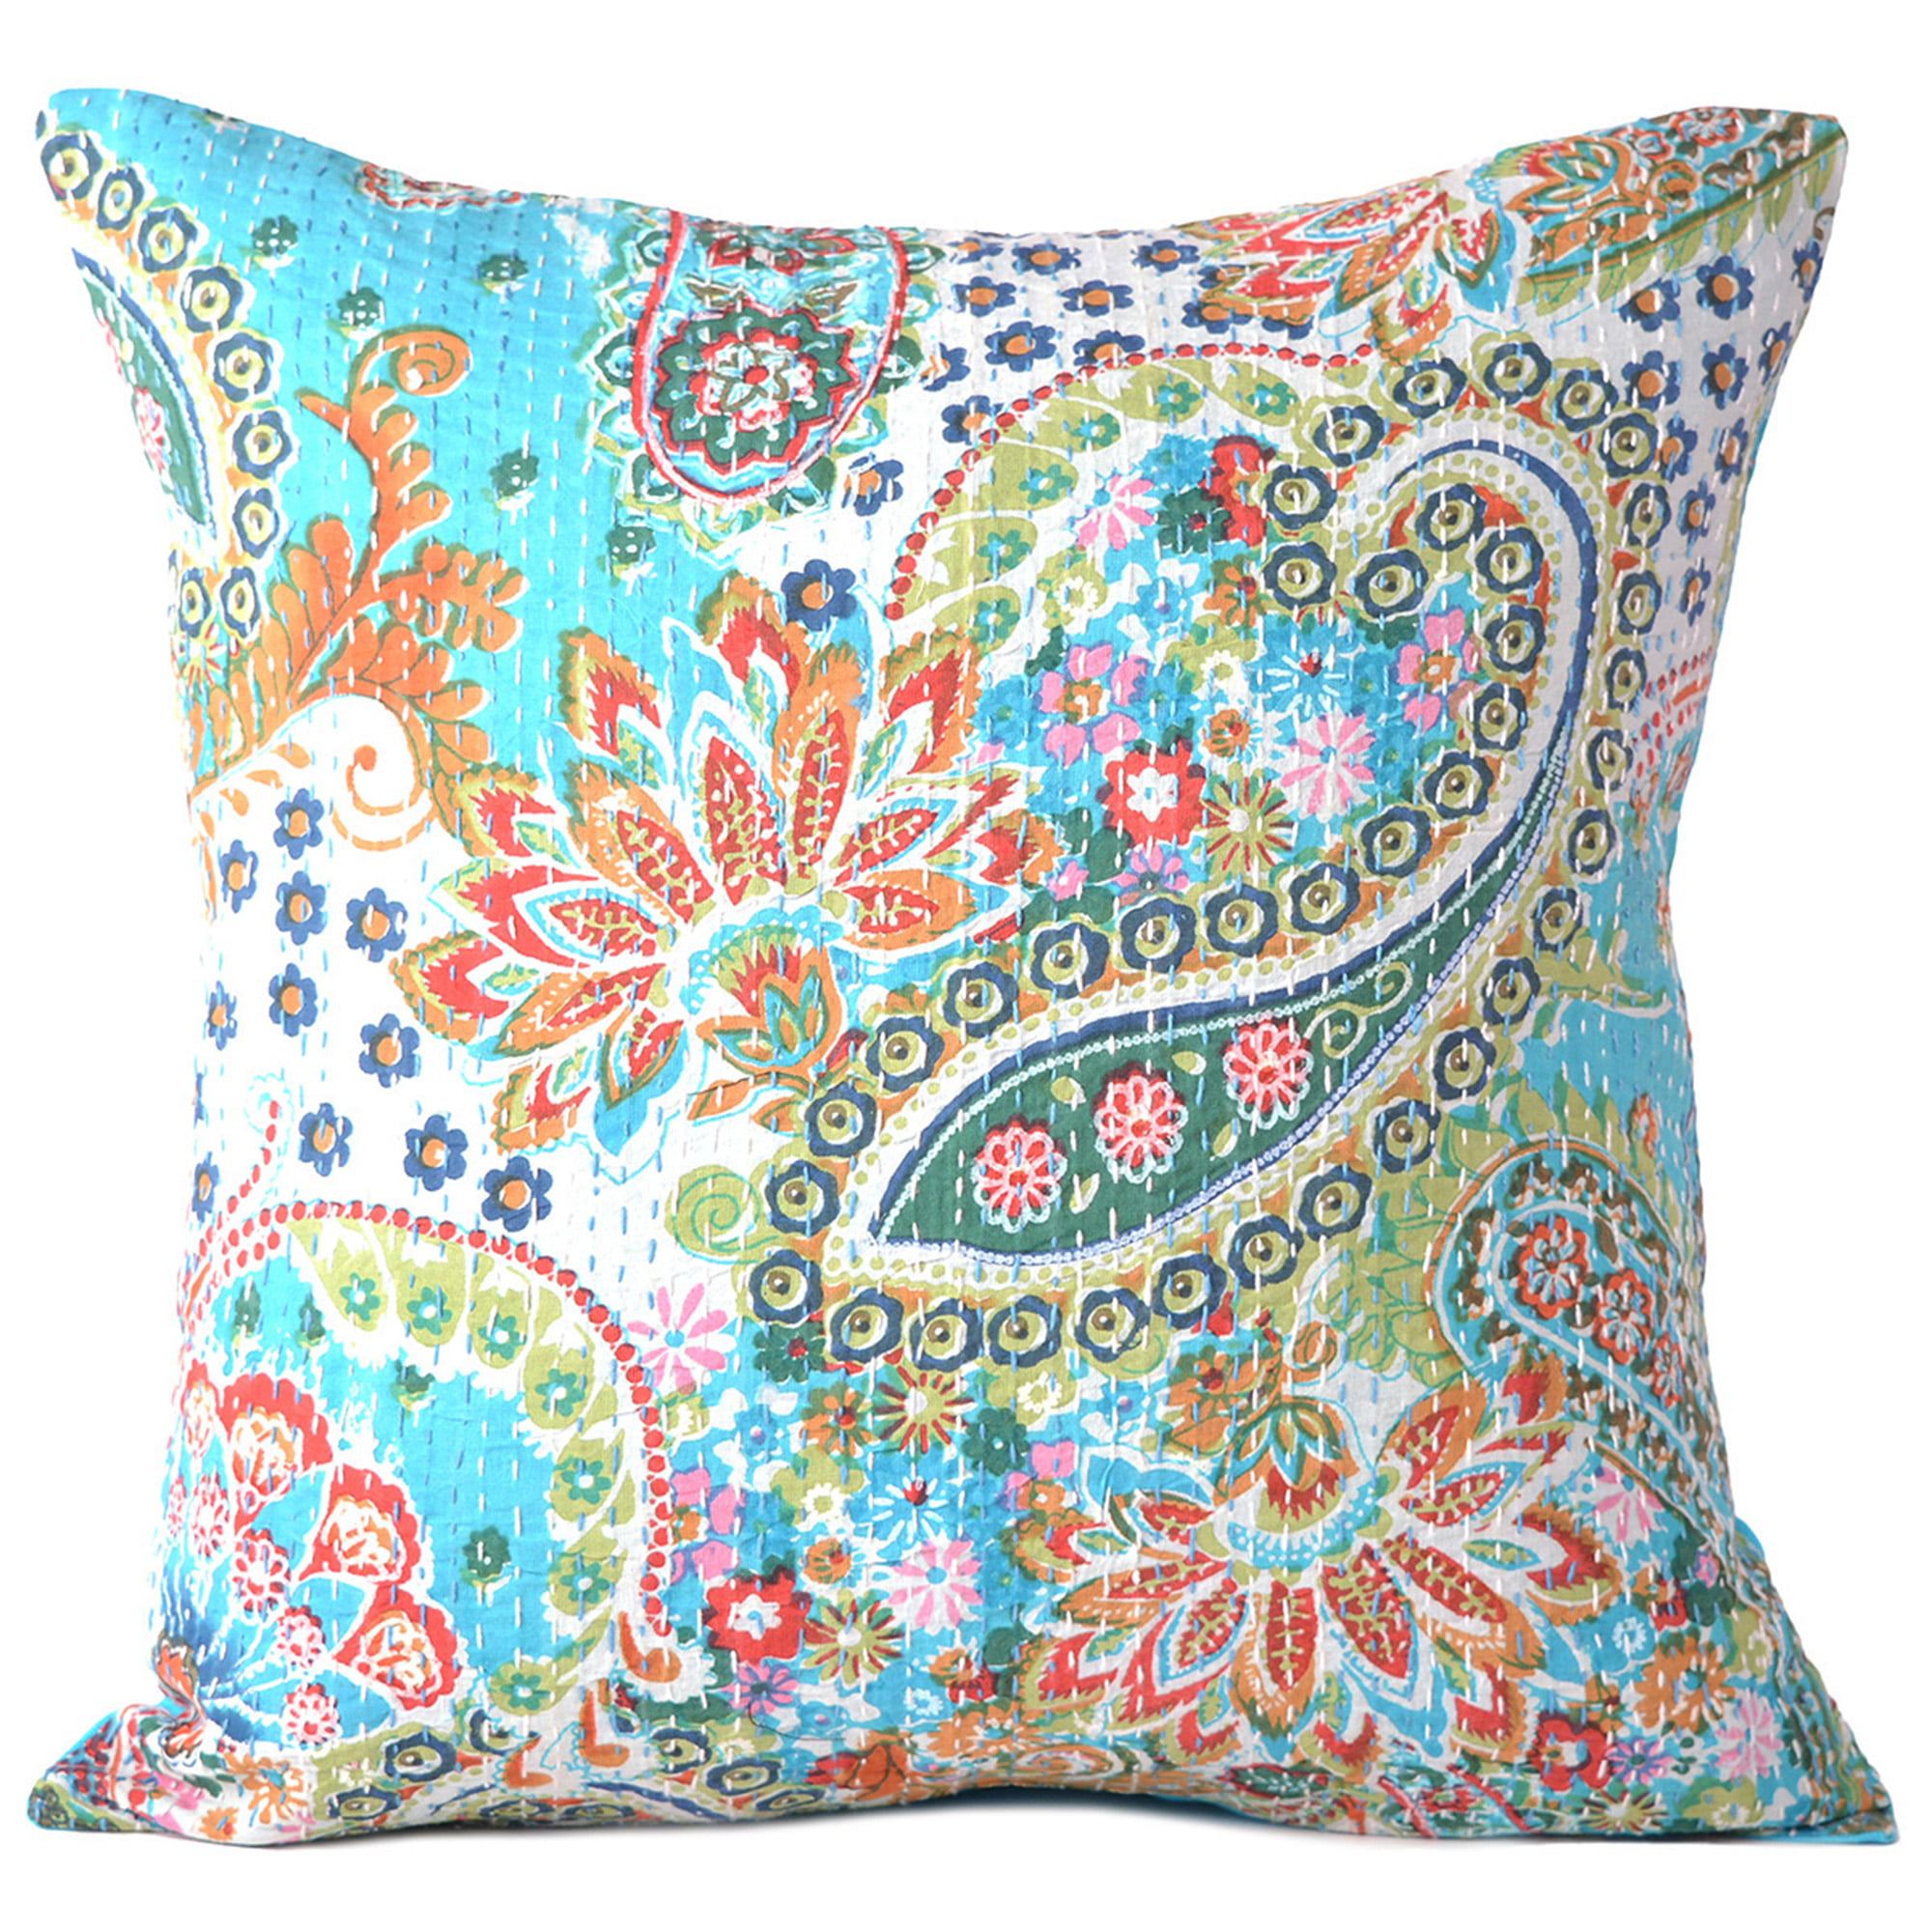 16" Yellow Paisley Pillow Cushion Cover Cotton Kantha Embroidered Throw INDIAN 